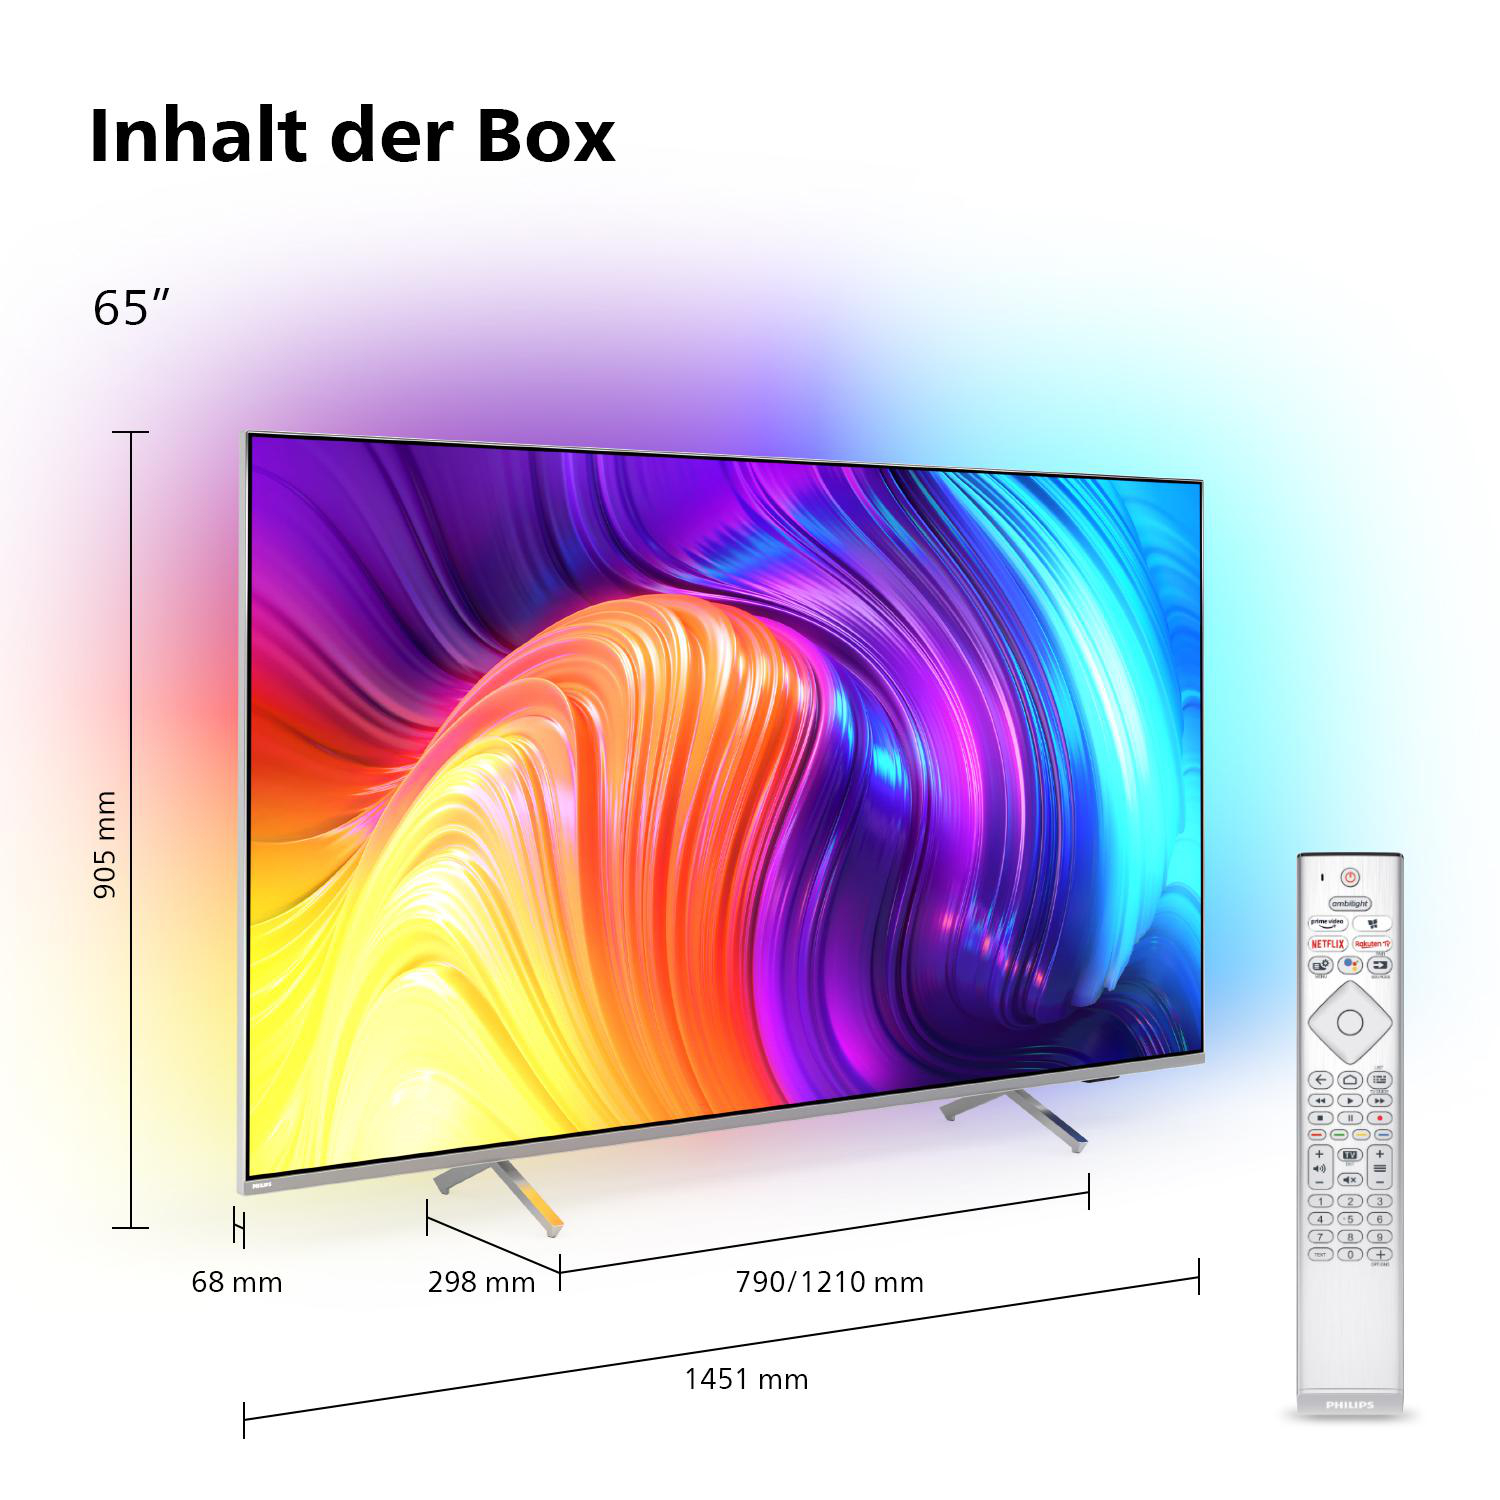 PHILIPS 65PUS8507/12 Ambilight, TV™ (Flat, / One Zoll 164 cm, UHD TV TV, SMART The LED 4K, 11 (R)) Android 65